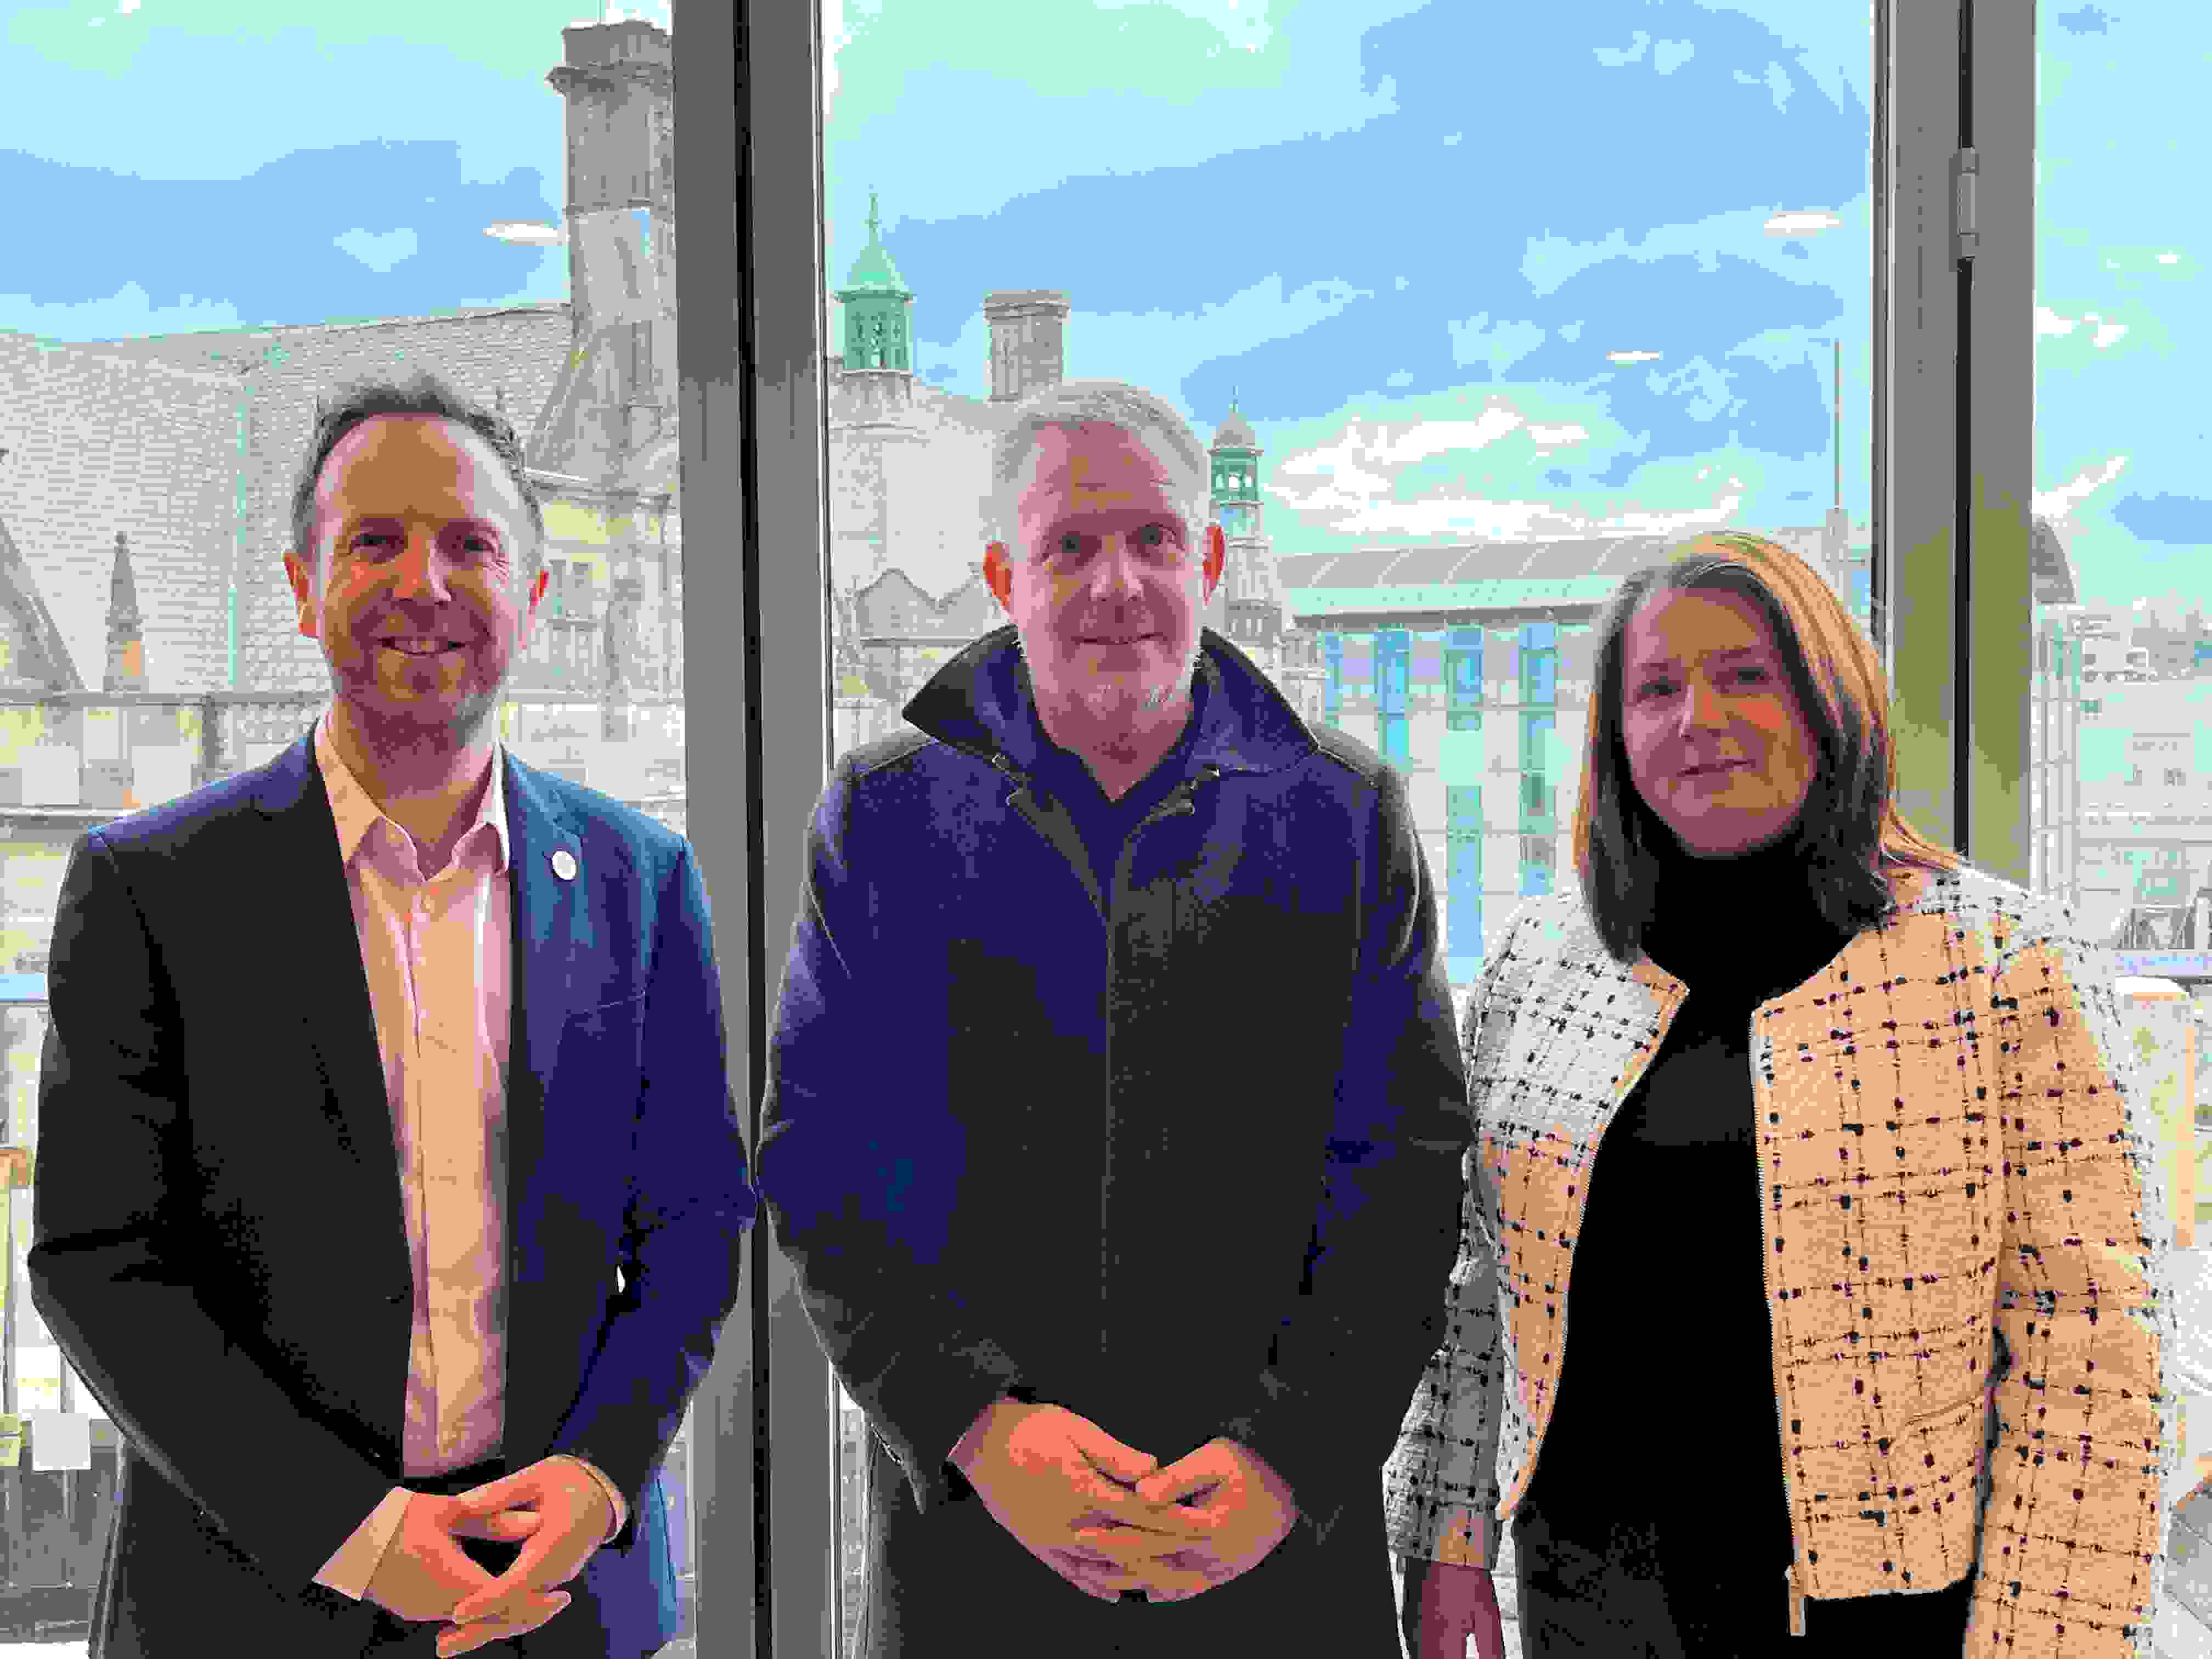 (From left to right) Cllr Ben Miskell, Chair of the Transport, Regeneration and Climate Committee, Andrew Davison, Project Director at Queensberry, and Valerie Donaldson, General Manager of Radisson Blu Sheffield.